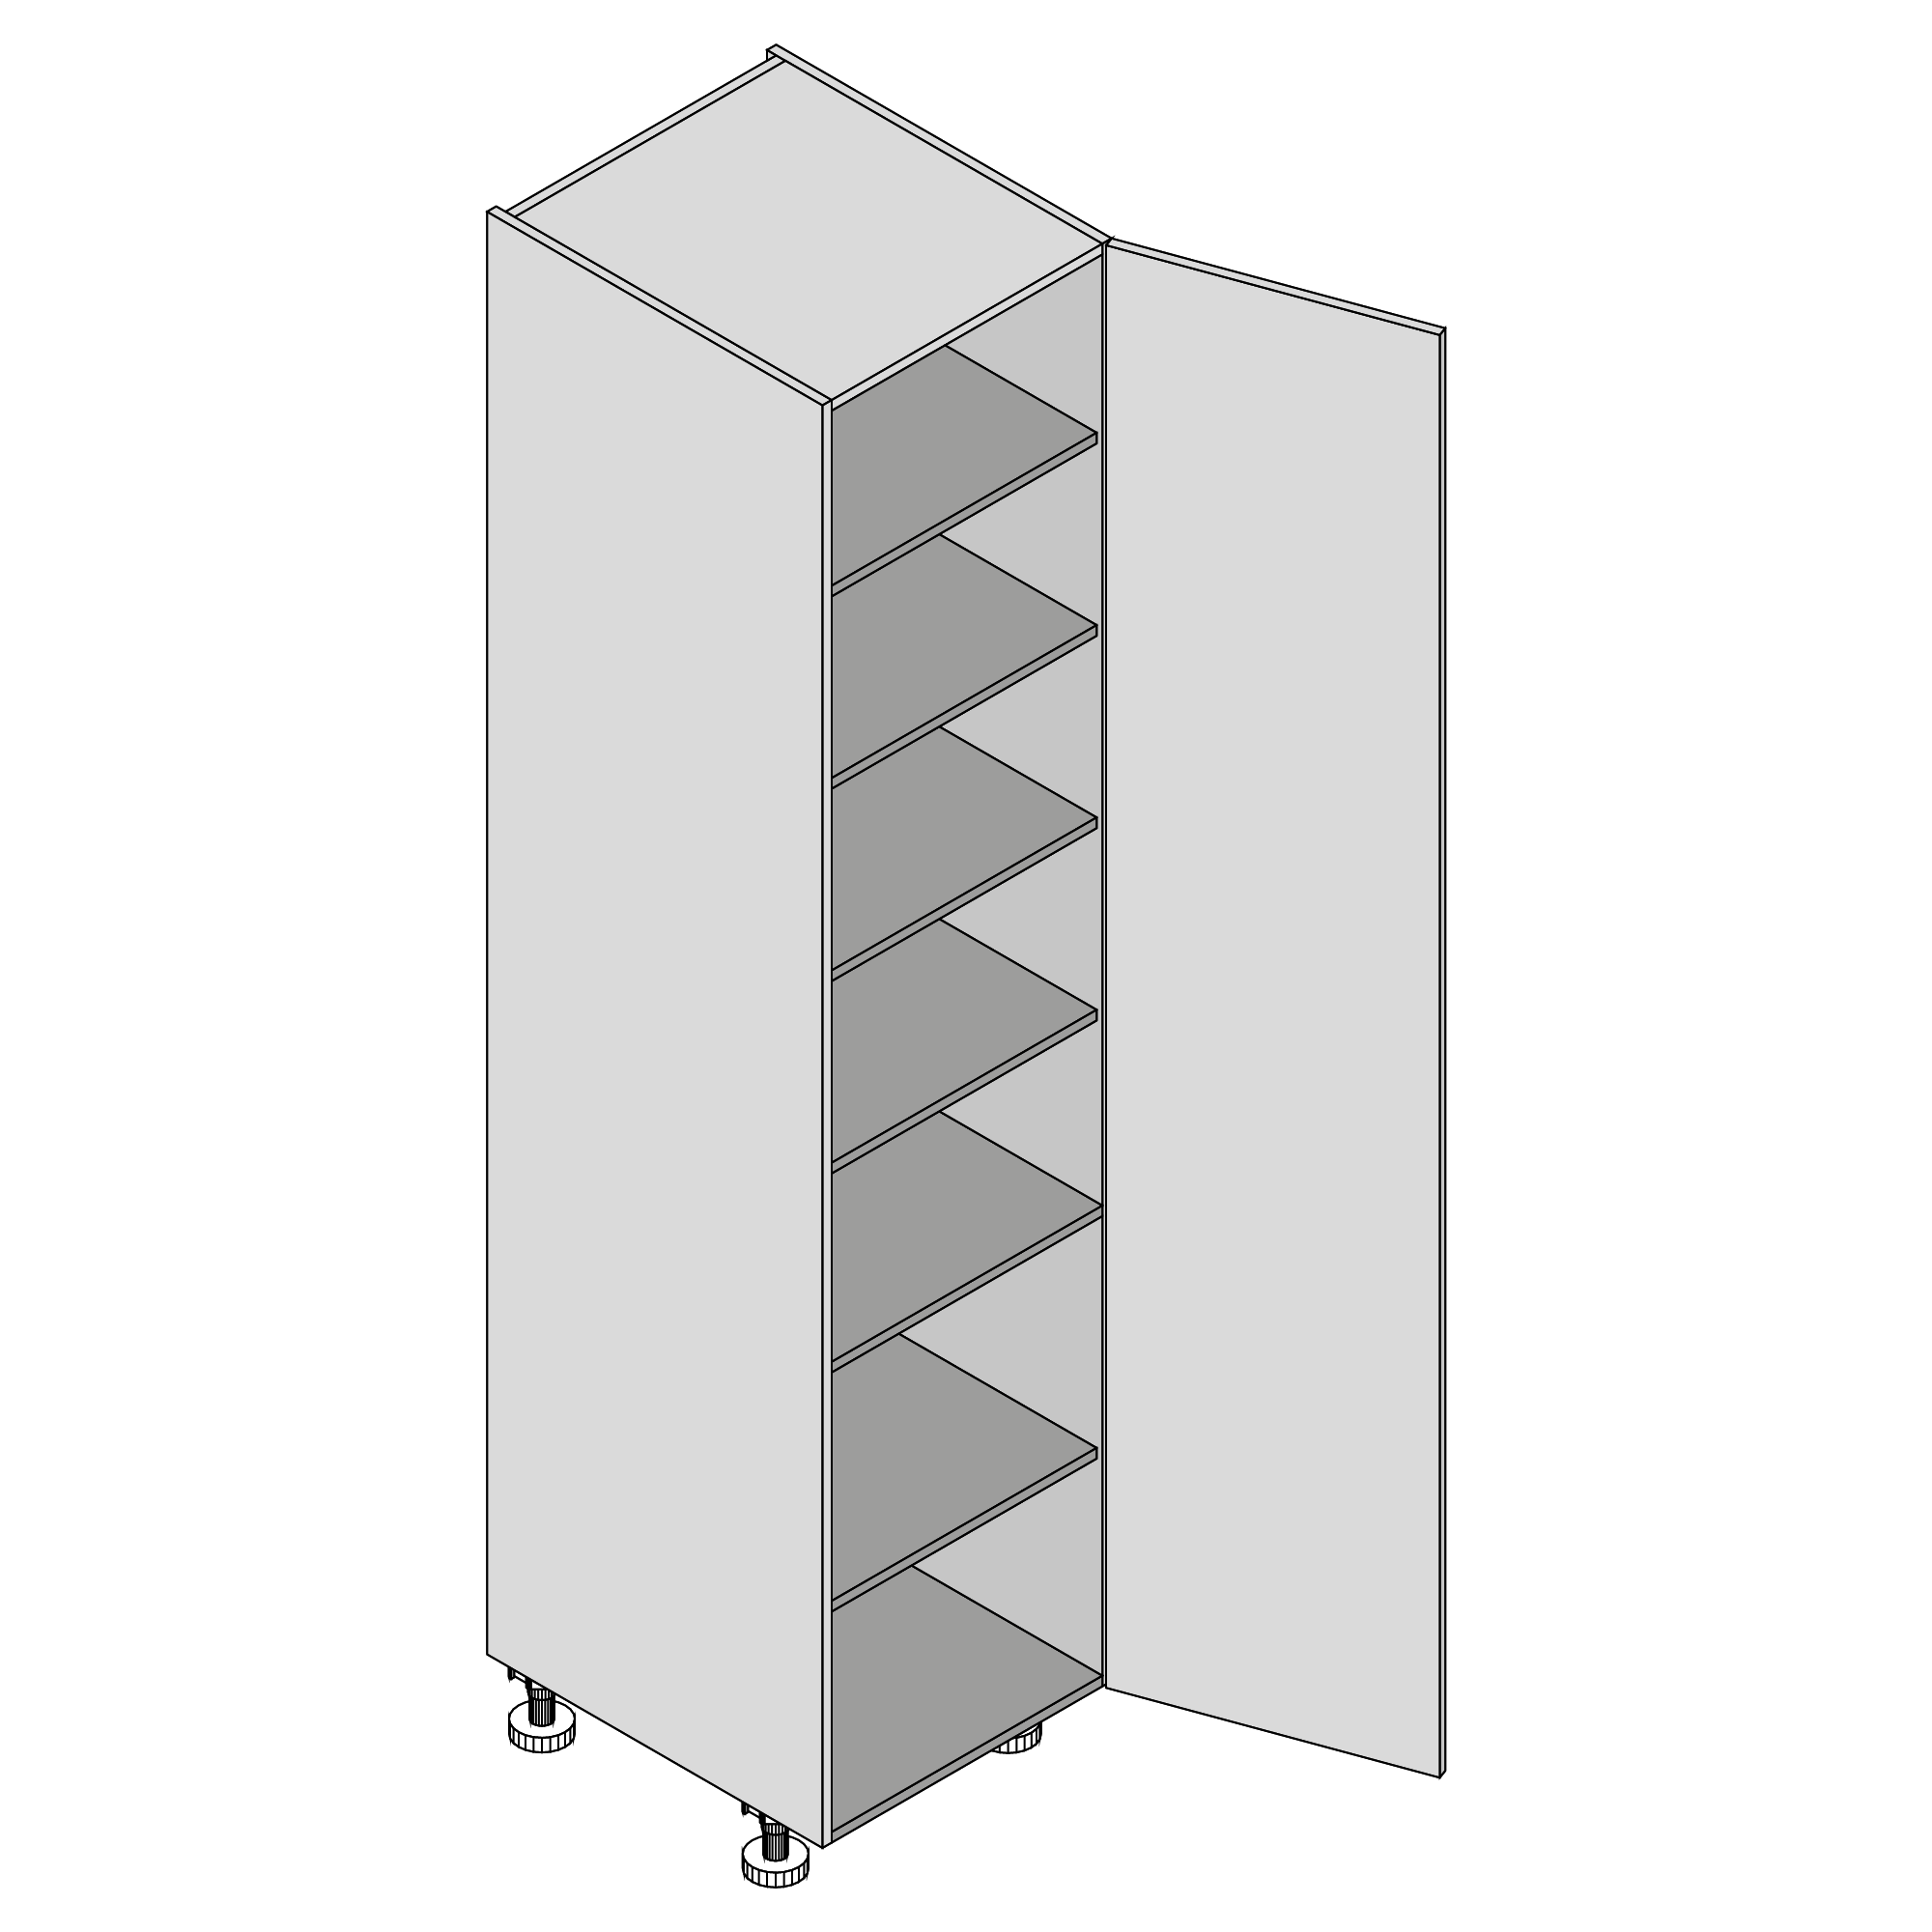 Diagram of a pantry cabinet with one door